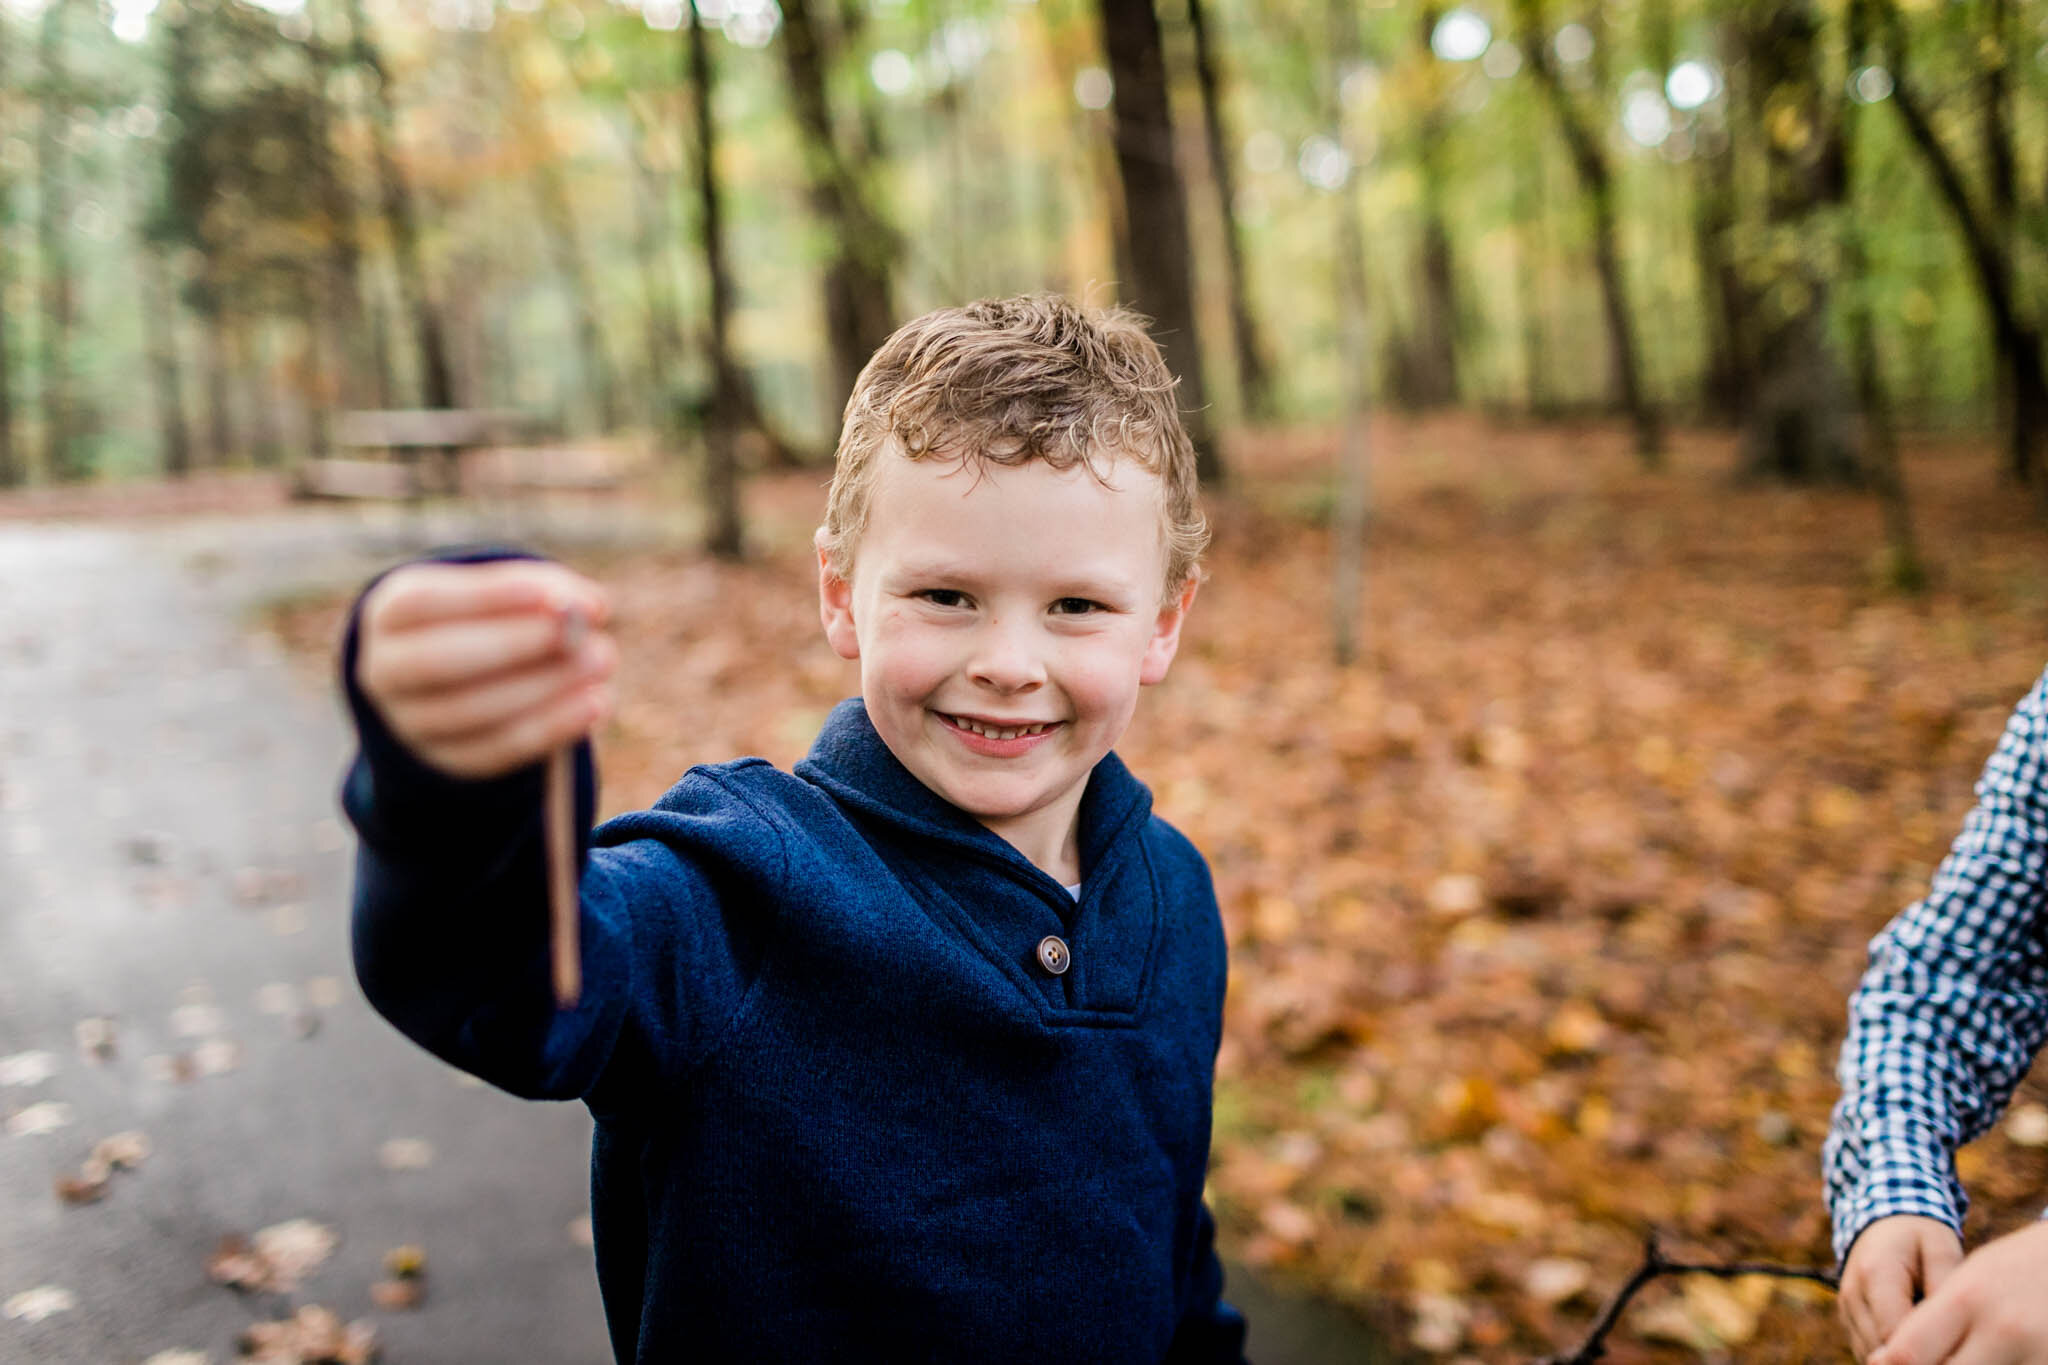 Raleigh Family Photographer | By G. Lin Photography | Umstead Park | Young boy holding earthworm and smiling